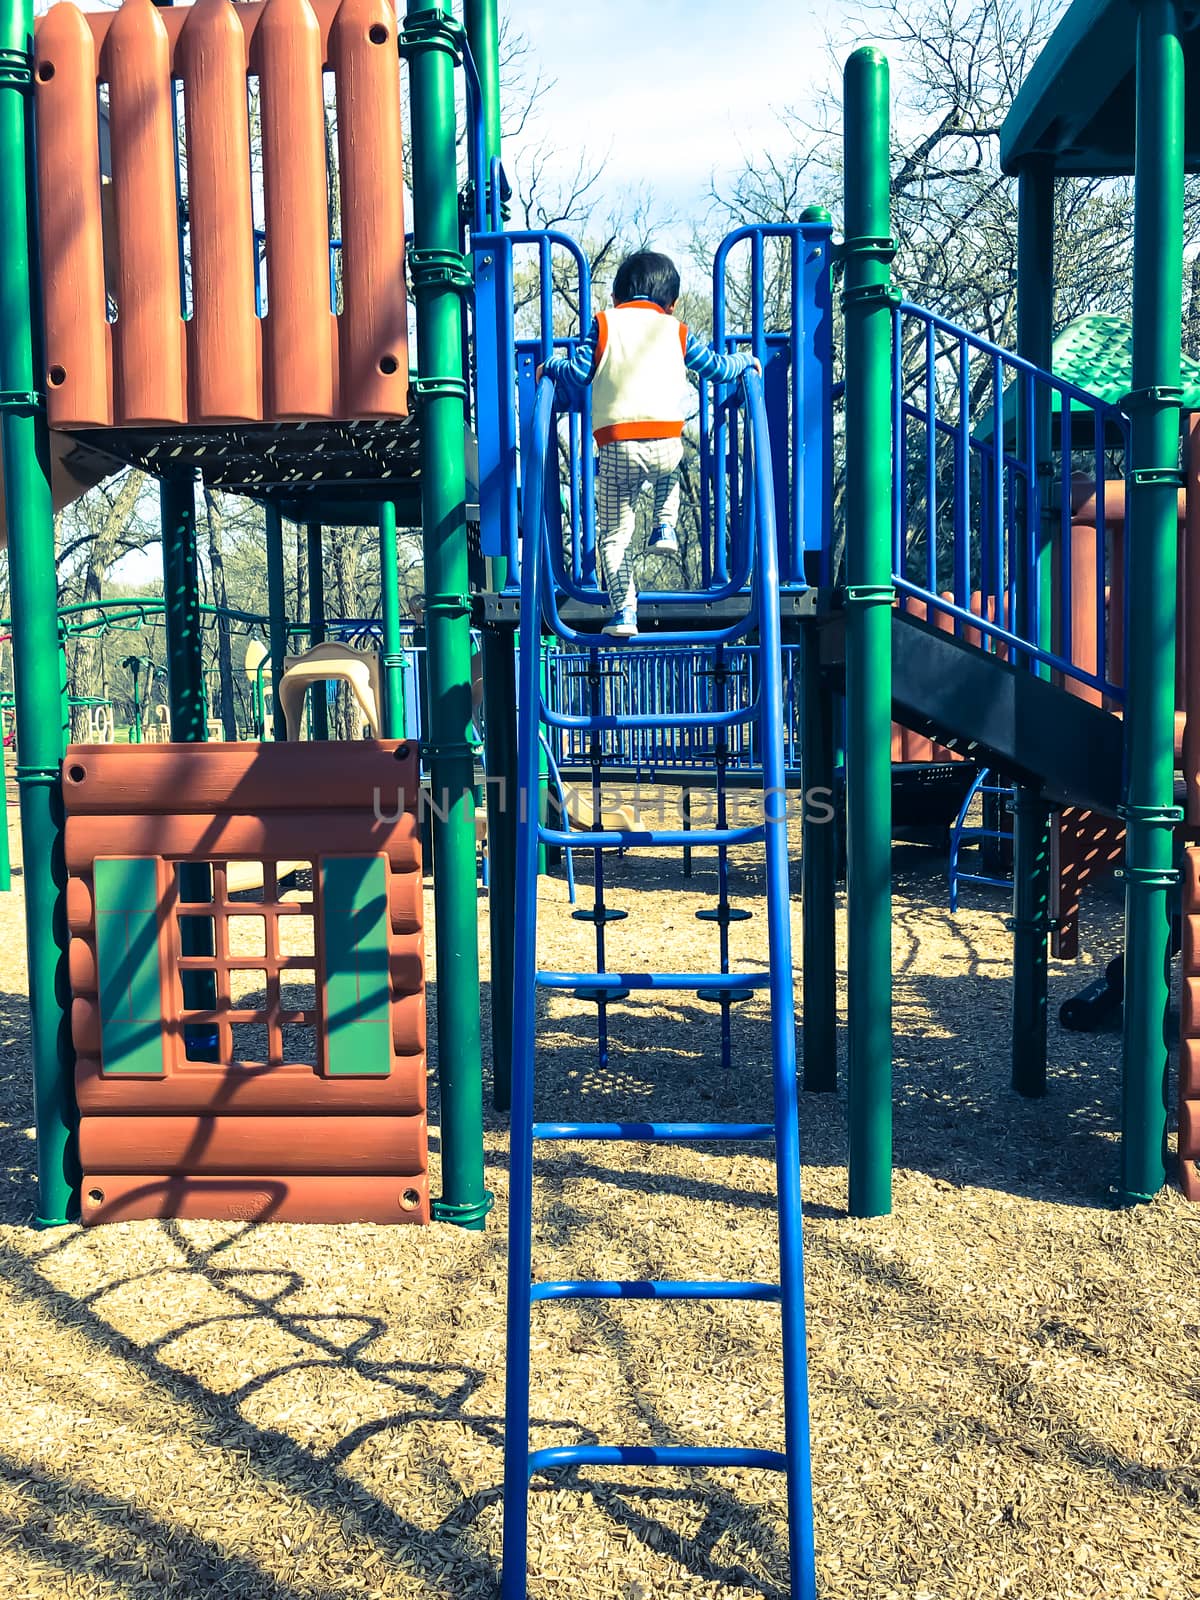 Outdoor playground with children playing wintertime in North Texas, America by trongnguyen